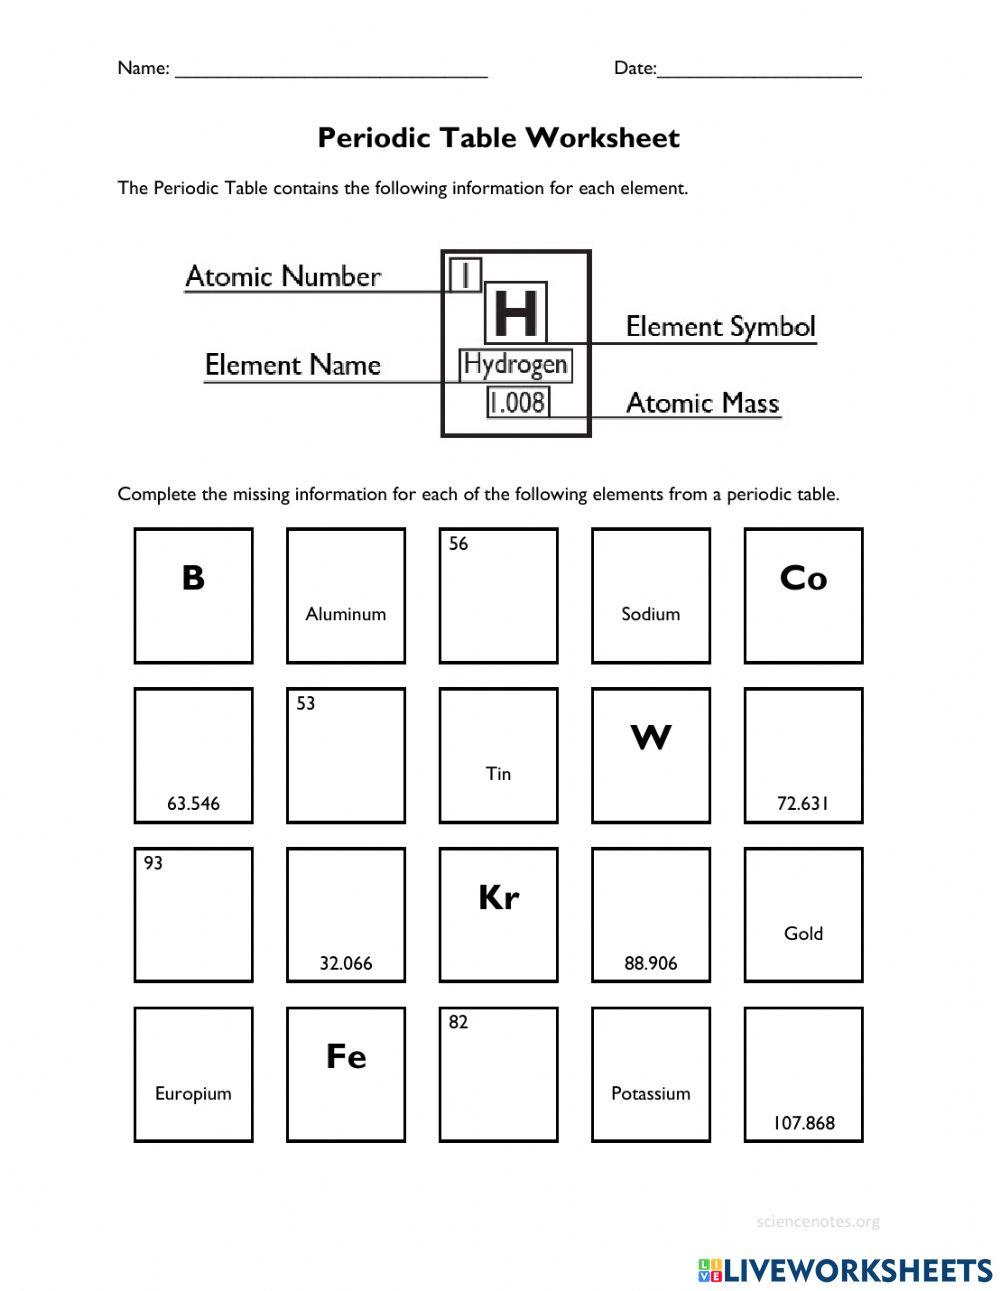 Using The Periodic Table Worksheet